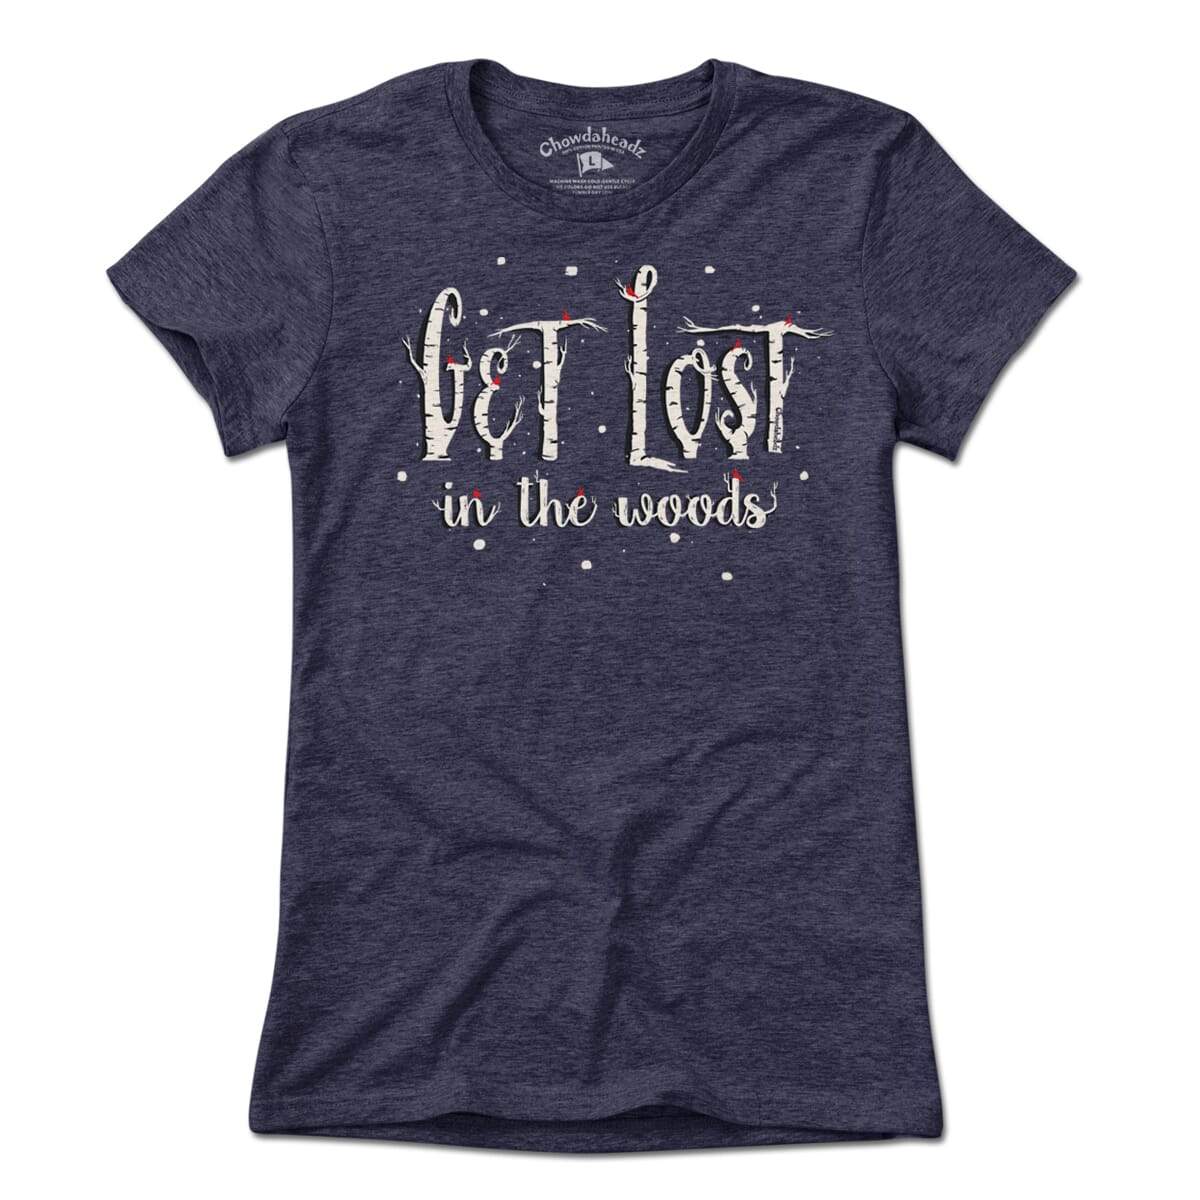 Get Lost in the Woods T-Shirt - Chowdaheadz